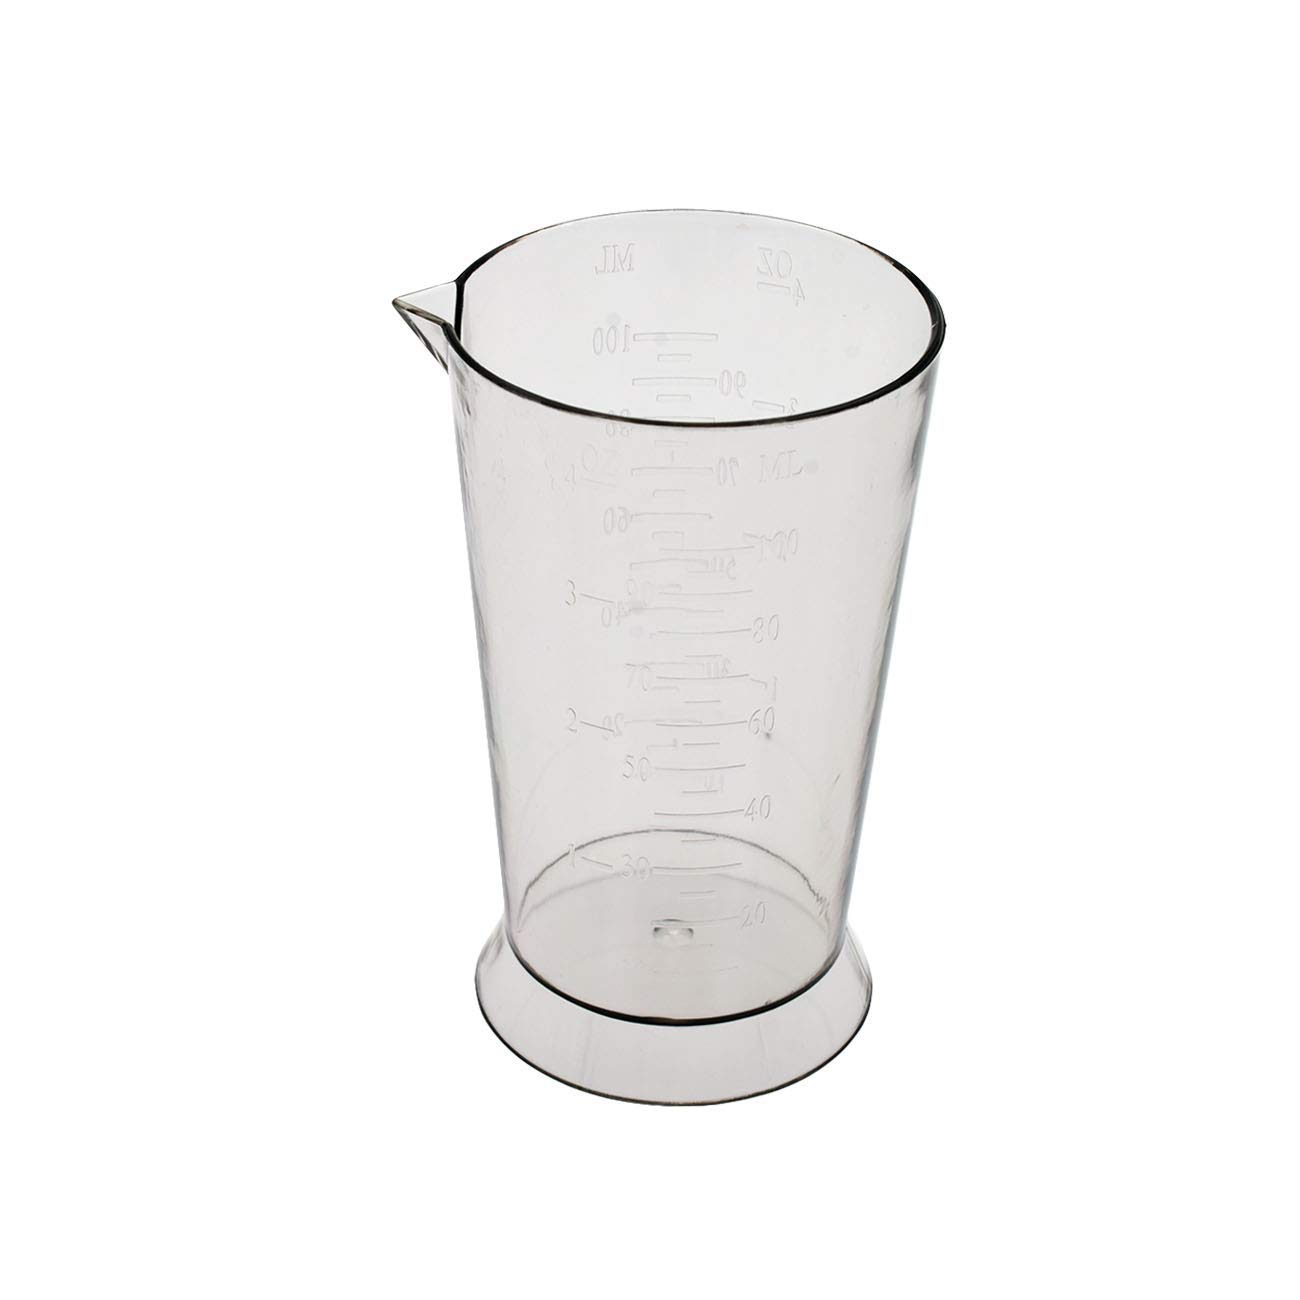 Colortrak Beaker, Easy To Read Color Beaker, Measurement Markings in Ounces and Milliliters, 4 ounce Capacity, Ideal For All Sty